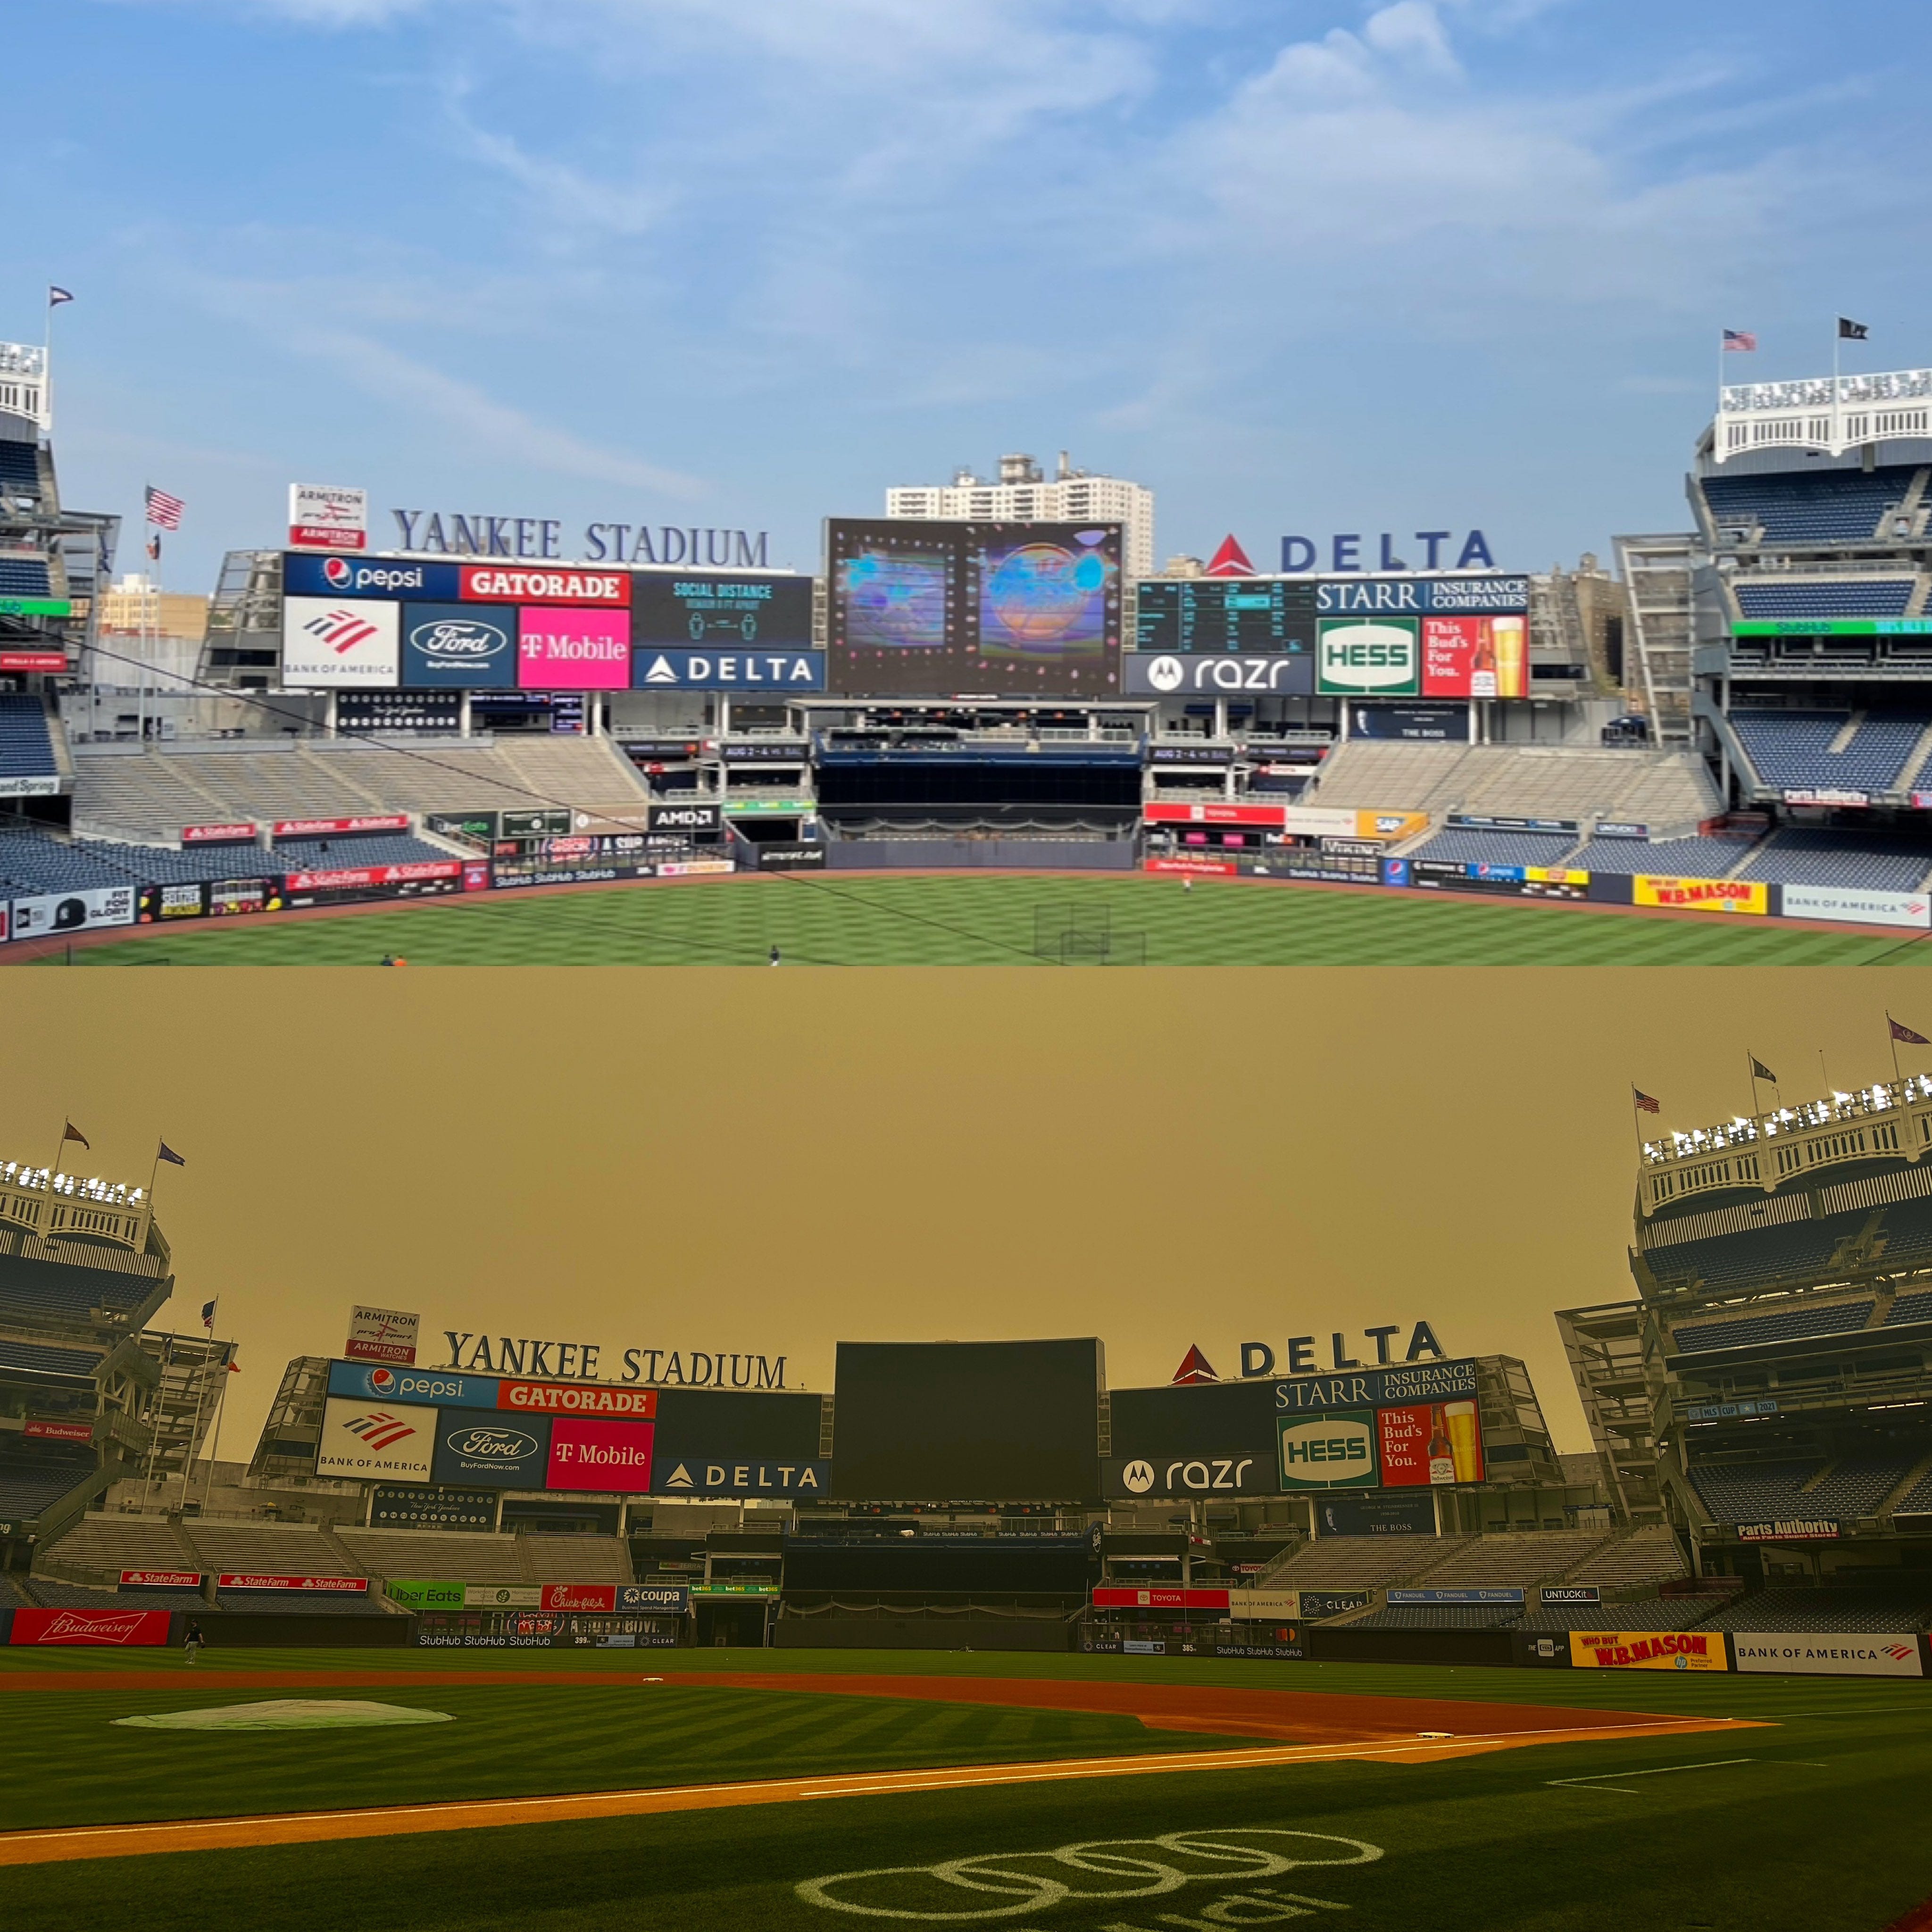 Yankees play on through 'unhealthy' conditions as smoke from